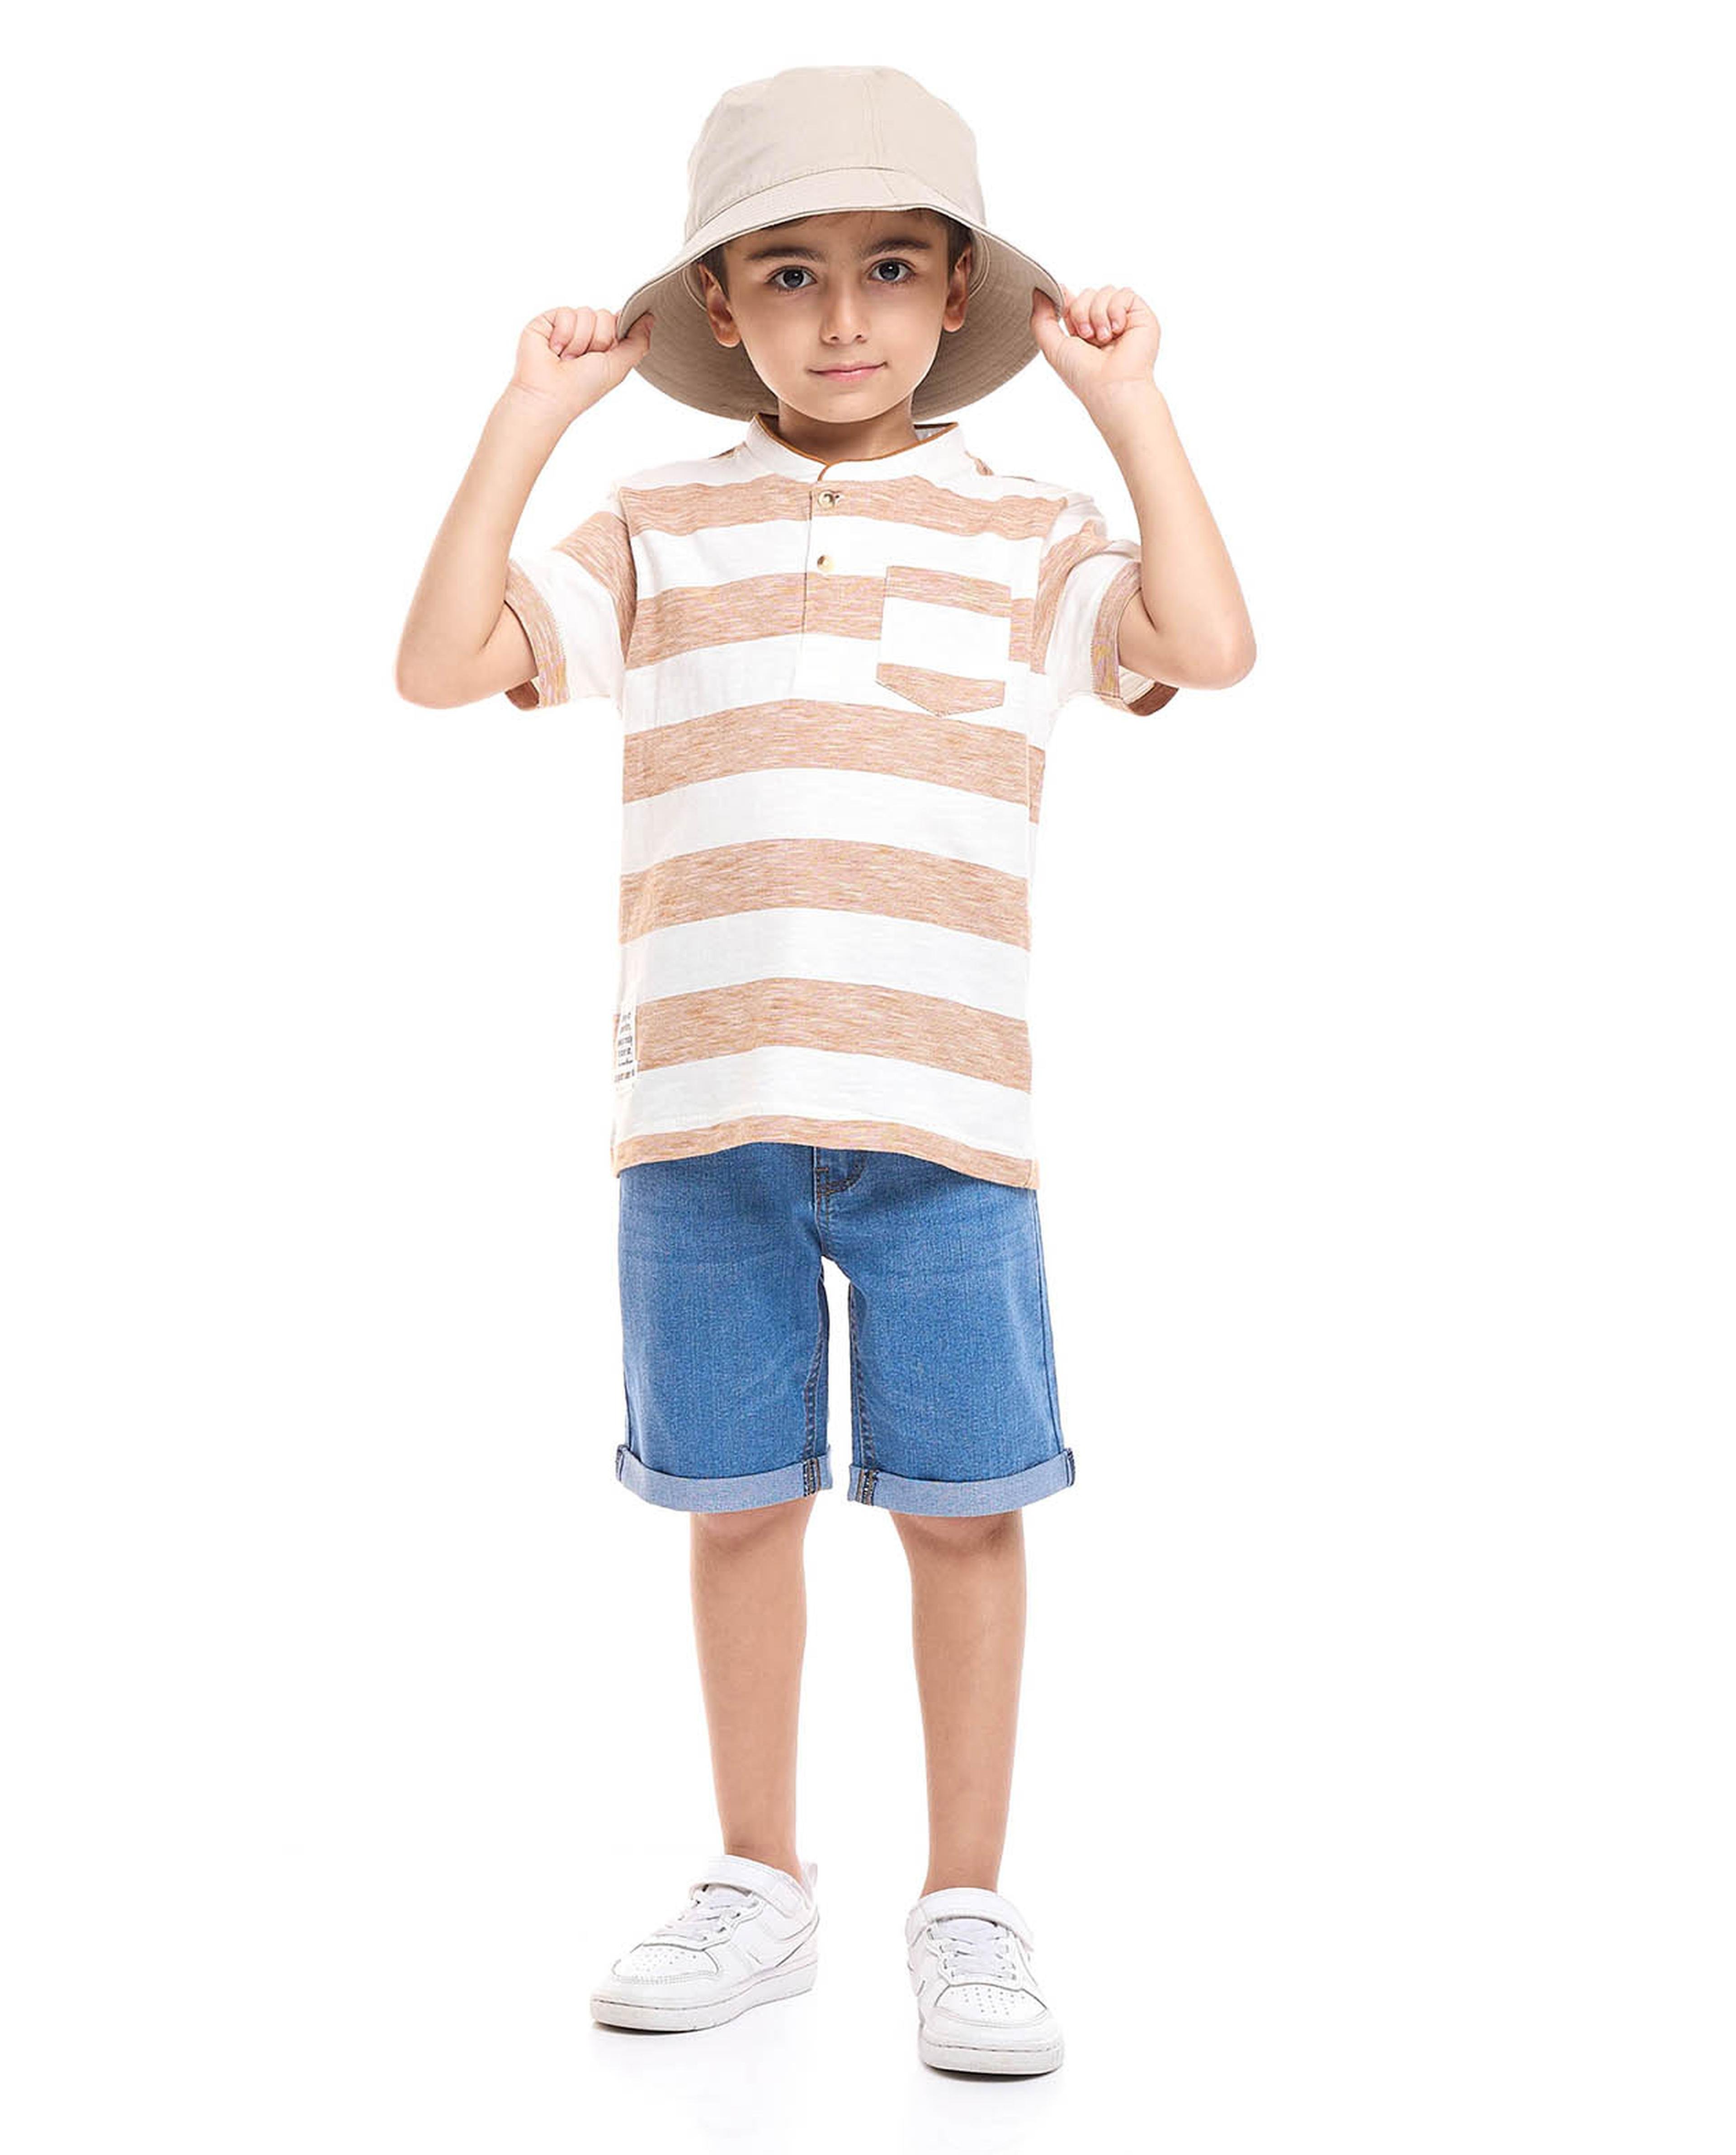 Striped T-Shirt with Stand Collar and Short Sleeves